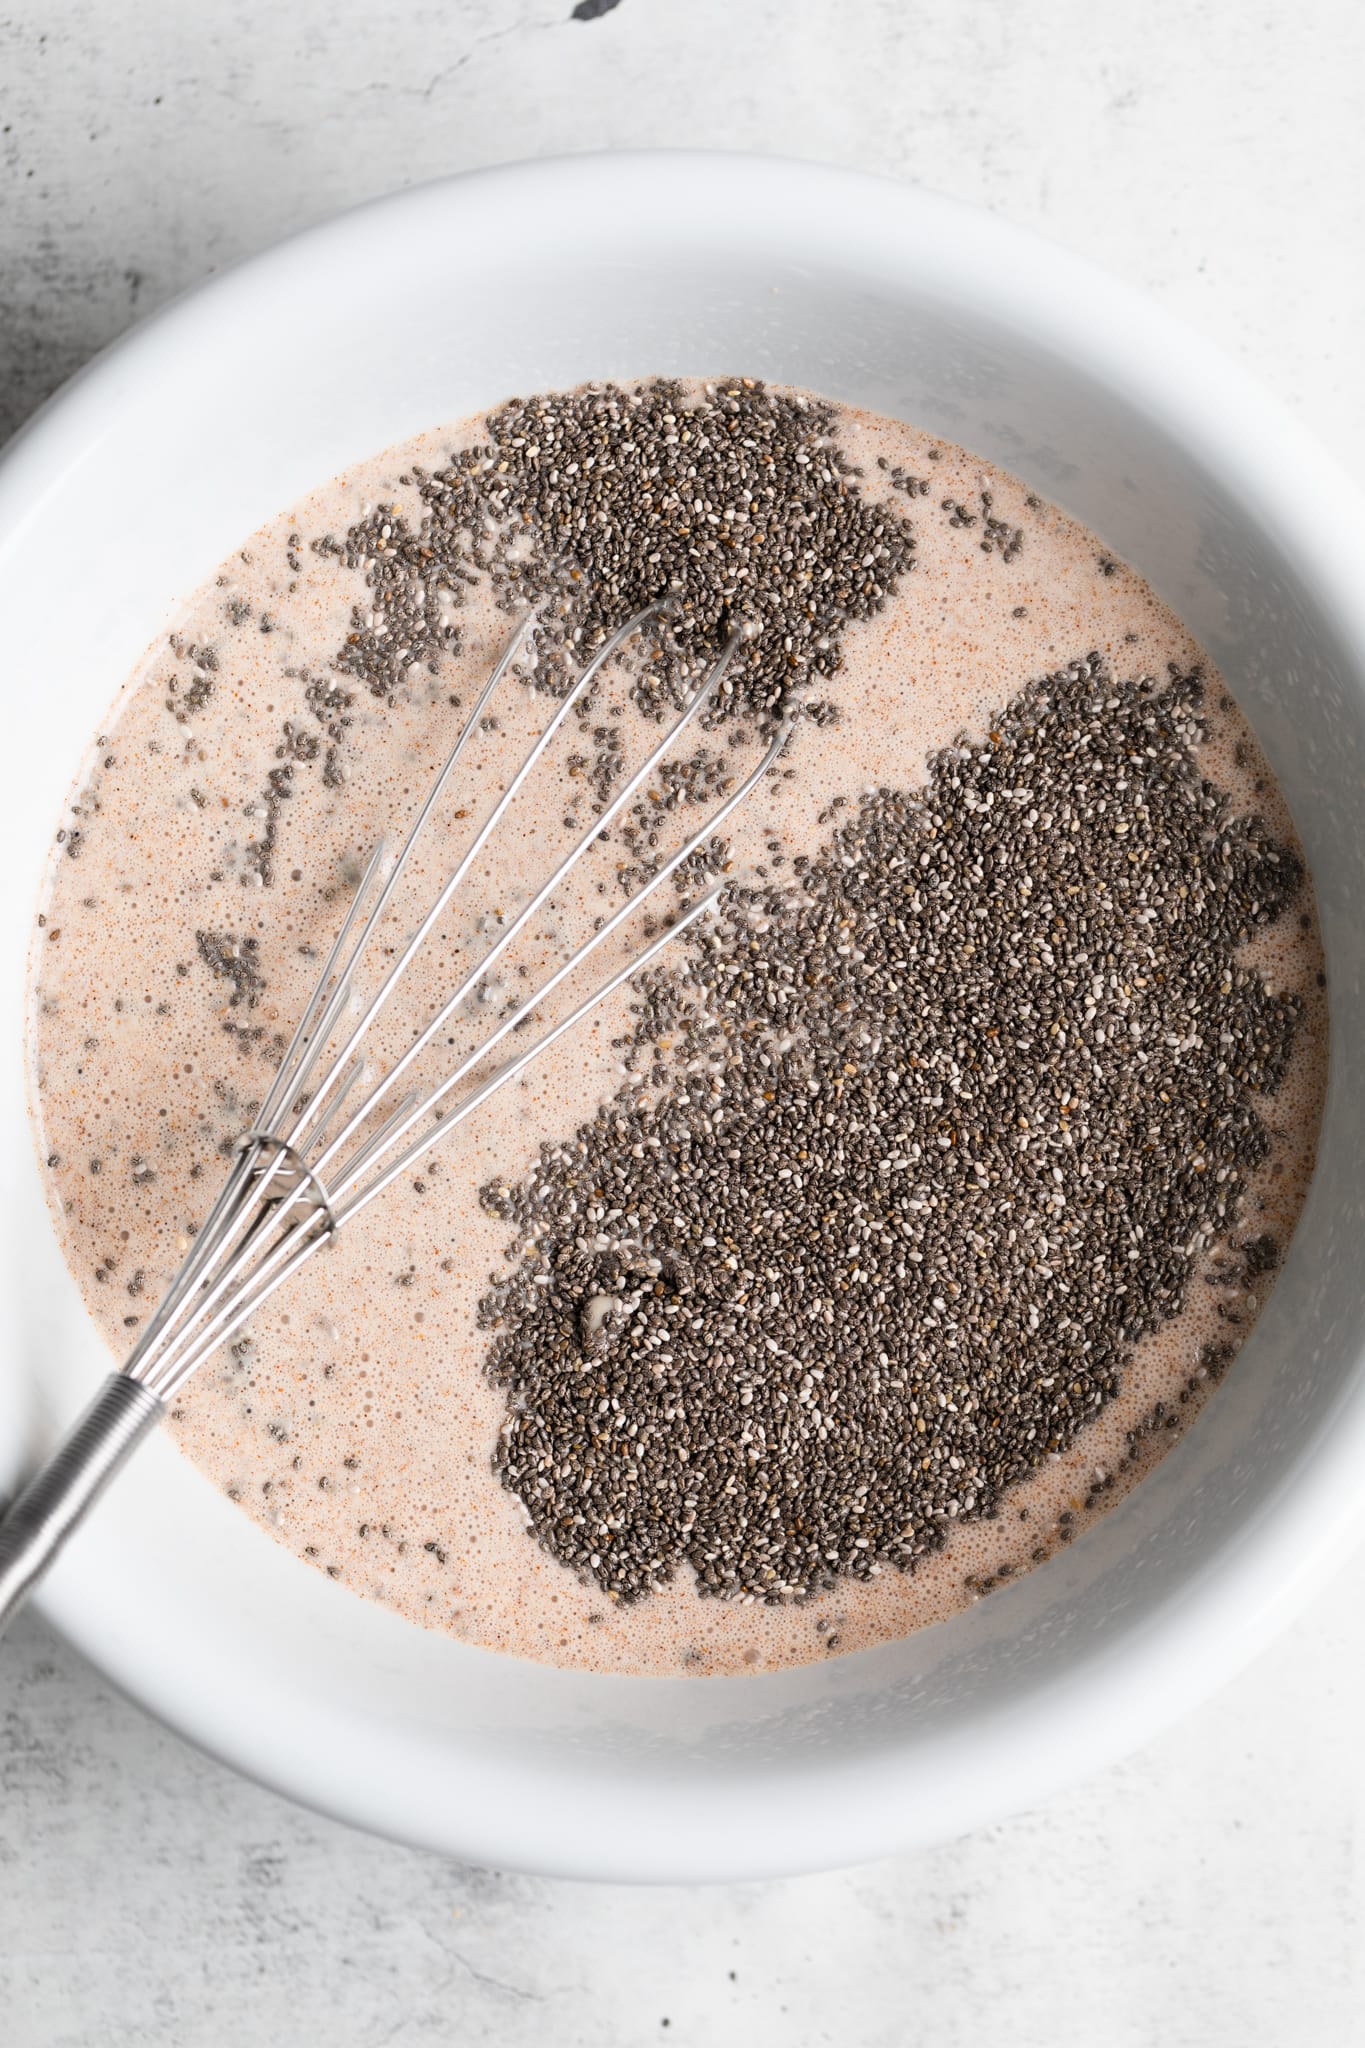 chia seeds and whisk in bowl